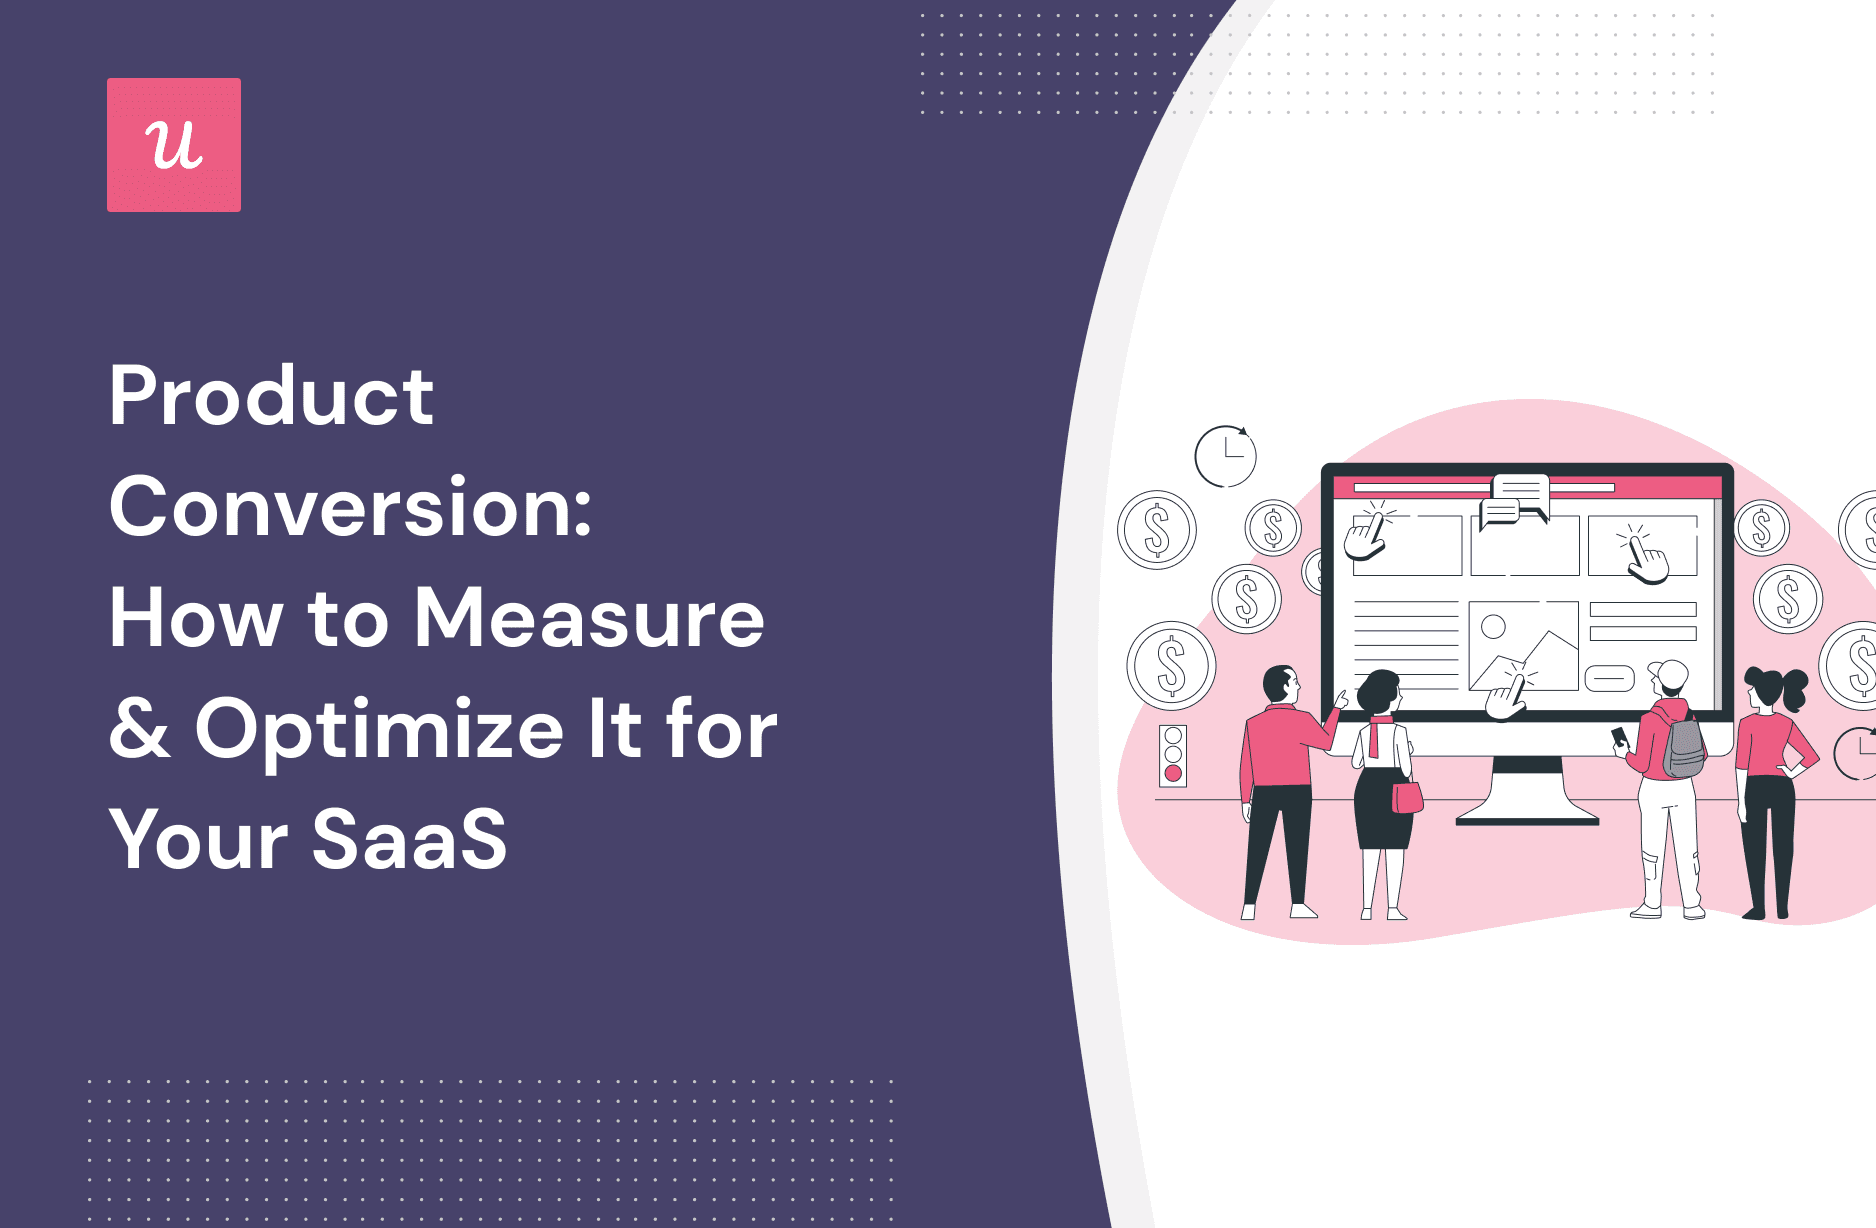 Product Conversion: How To Measure & Optimize It for Your SaaS cover